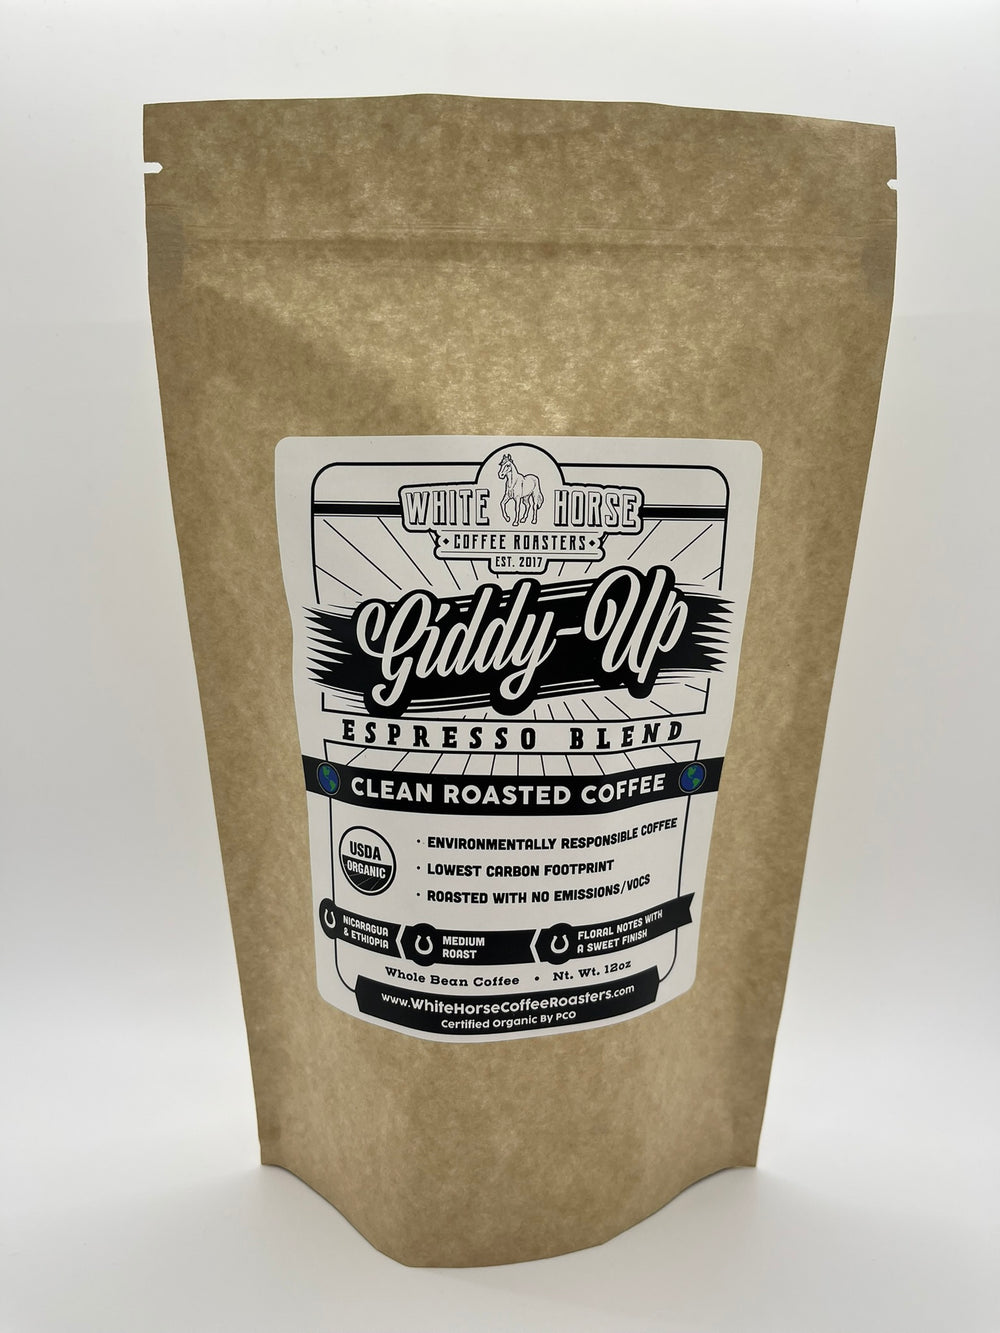 Giddy Up Espresso Blend Wholesale Wholesale - Source your coffee supply wholesale from White Horse Coffee Roasters for consistent quality in every batch.